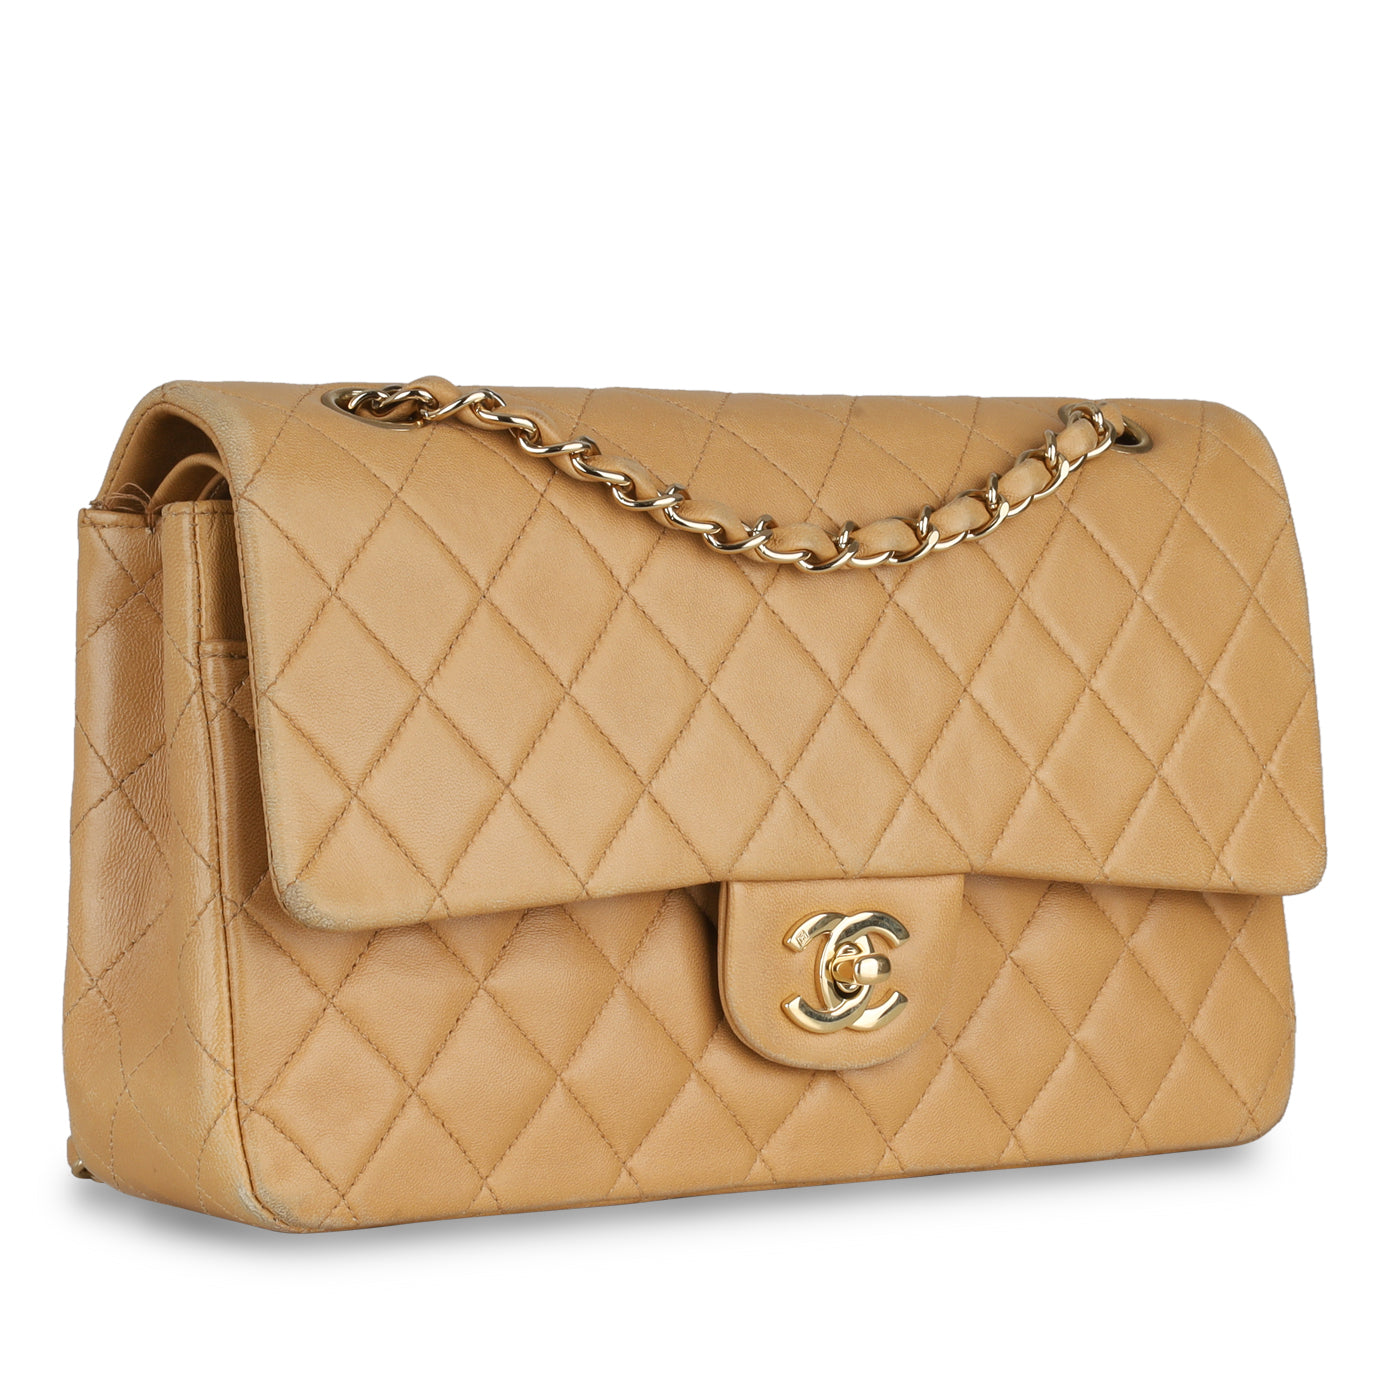 The Chanel Classic Flap Size Guide  Comparing Chanel Sizes  Sellier